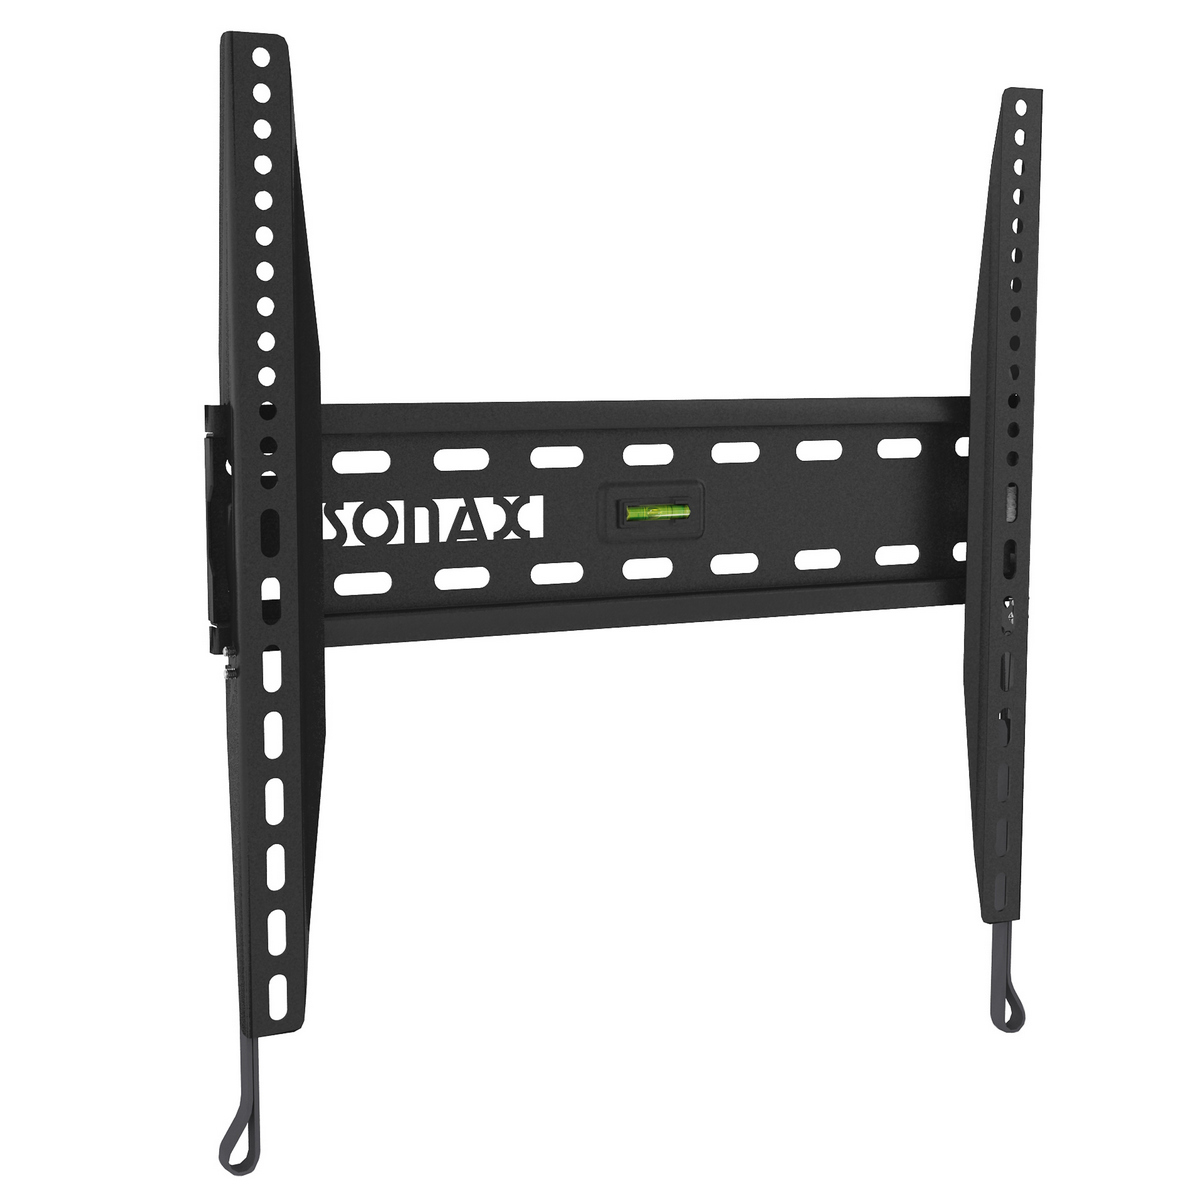 Corliving Pm-5500 Fixed Low Profile Wall Mount For 26" - 50" Tvs